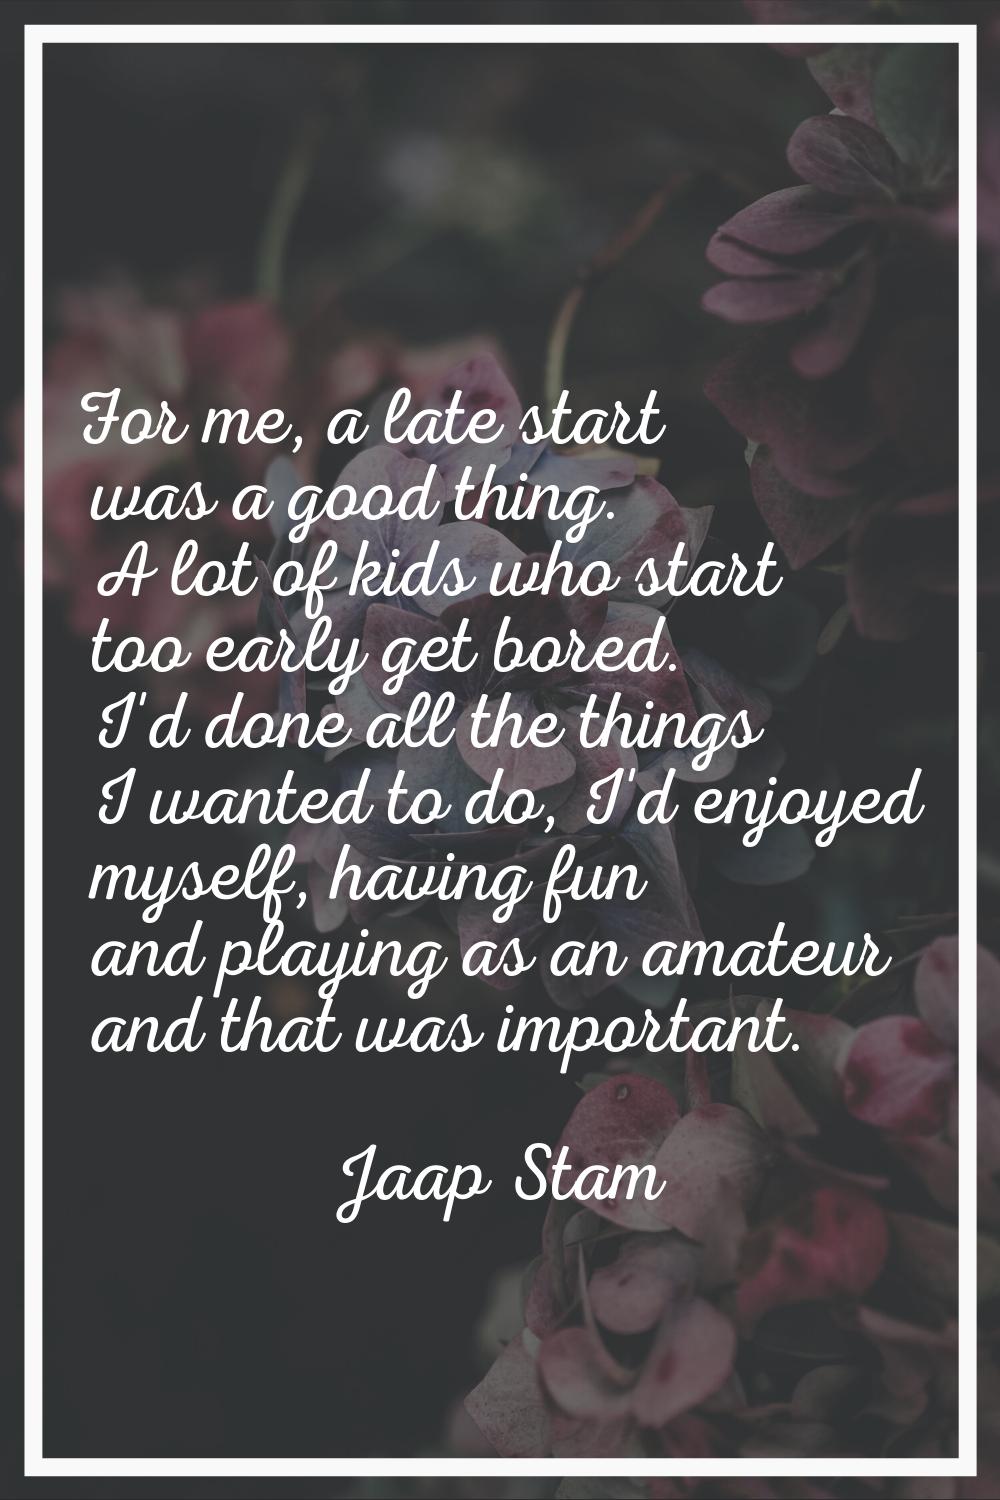 For me, a late start was a good thing. A lot of kids who start too early get bored. I'd done all th